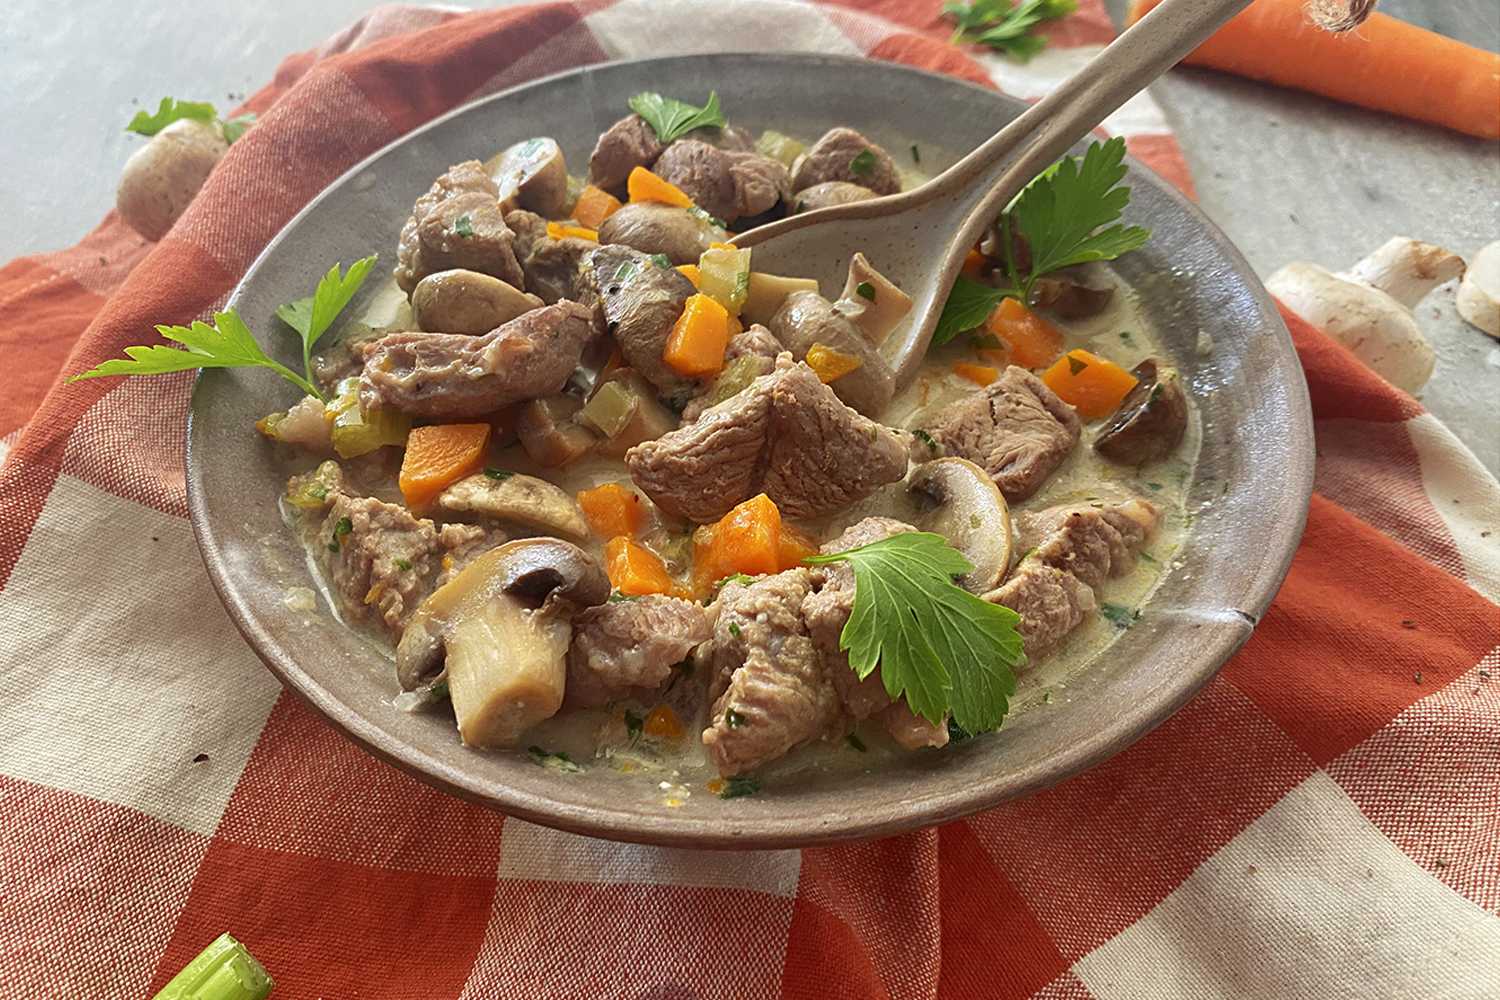 Beef cubed mixed with sliced mushrooms, celery, parsley and carrot cubes in yellow soup